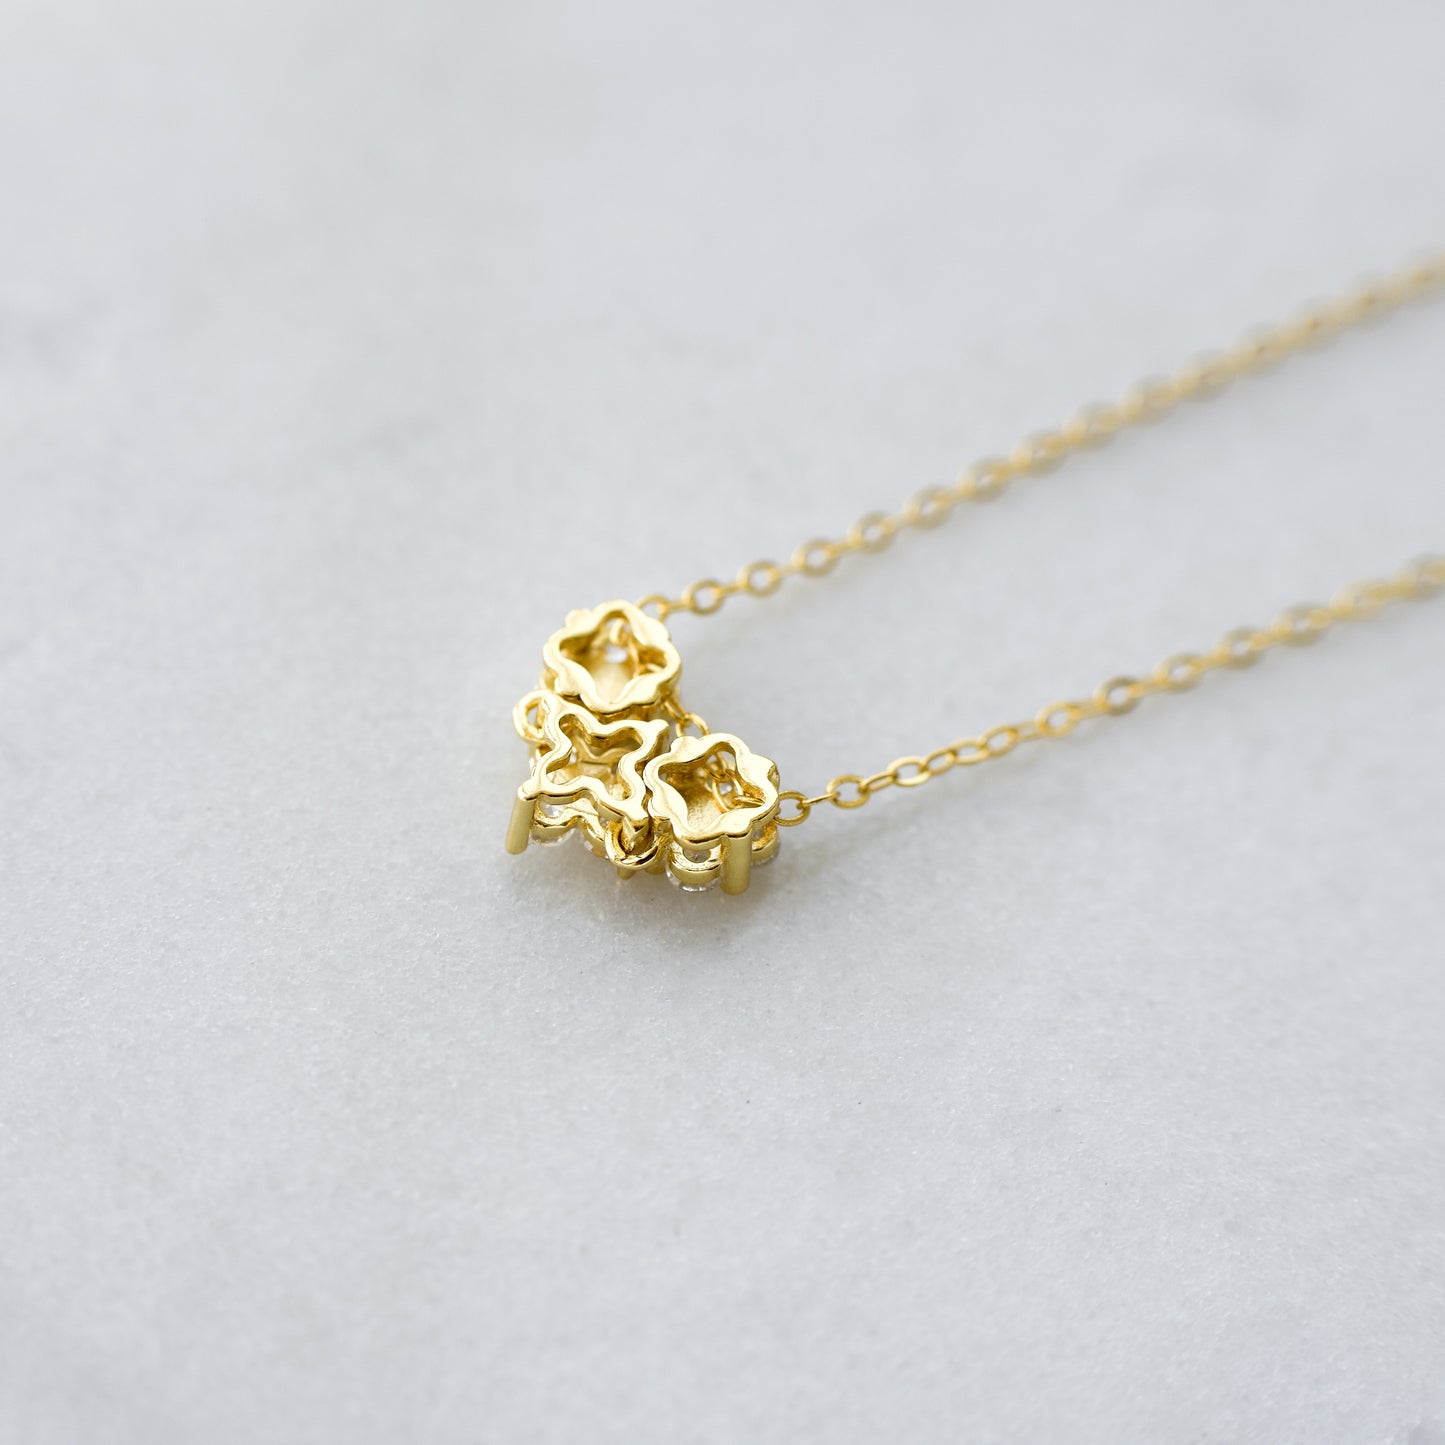 Two-In-One Necklace - Gold Heart Necklace & Flower Drop Necklace